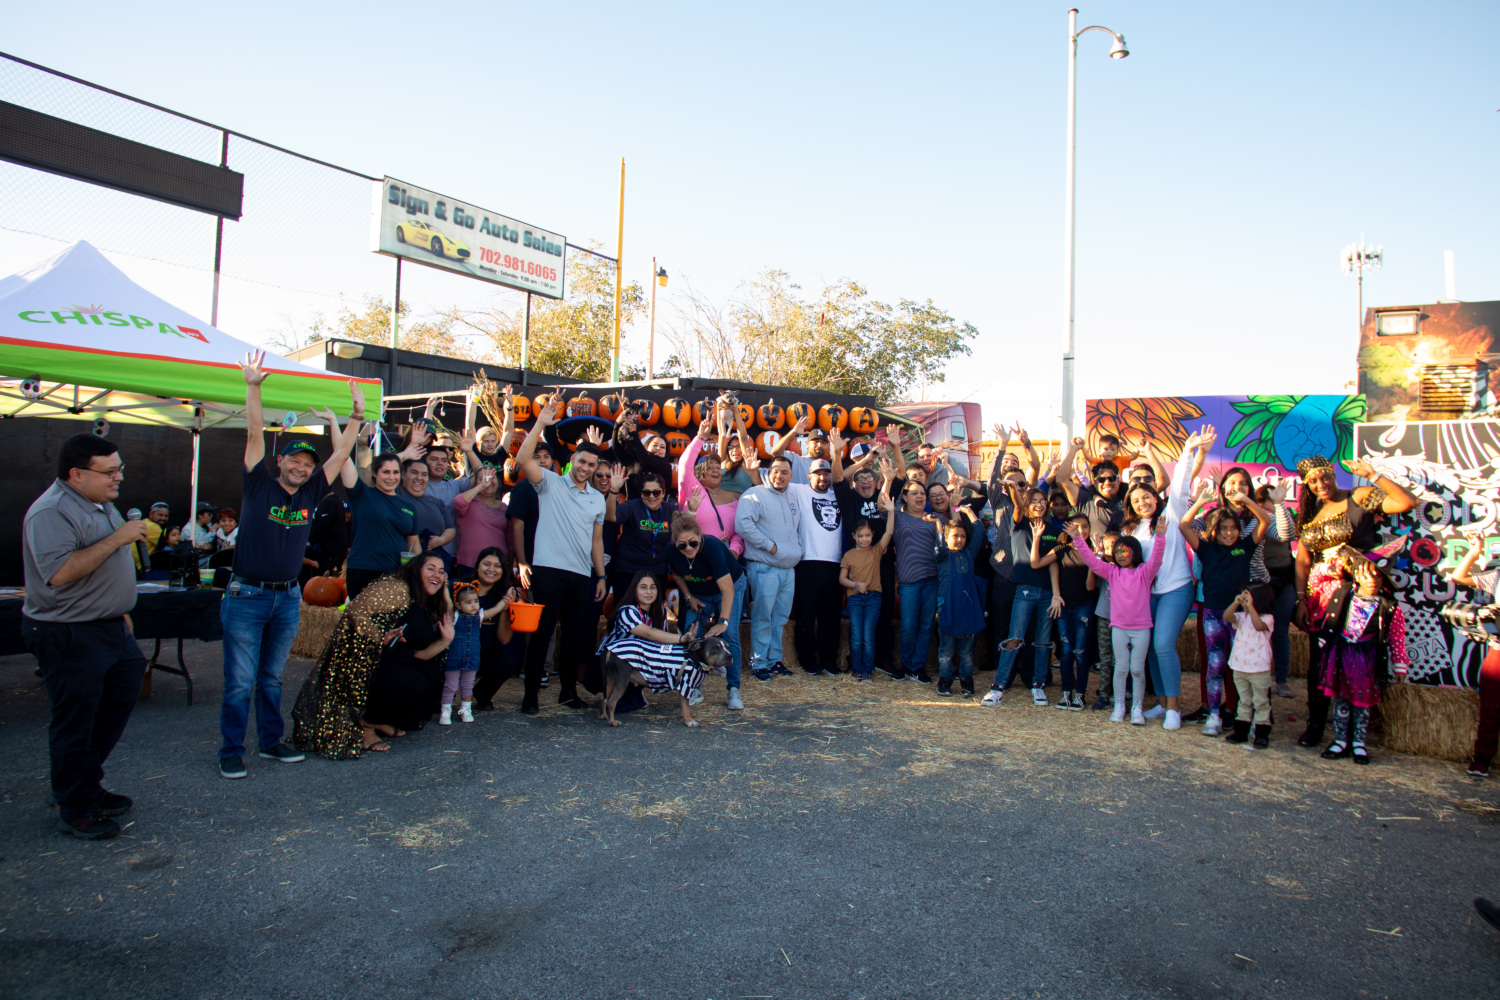 Community Members and Chispa staffers pose for a photo at a community event